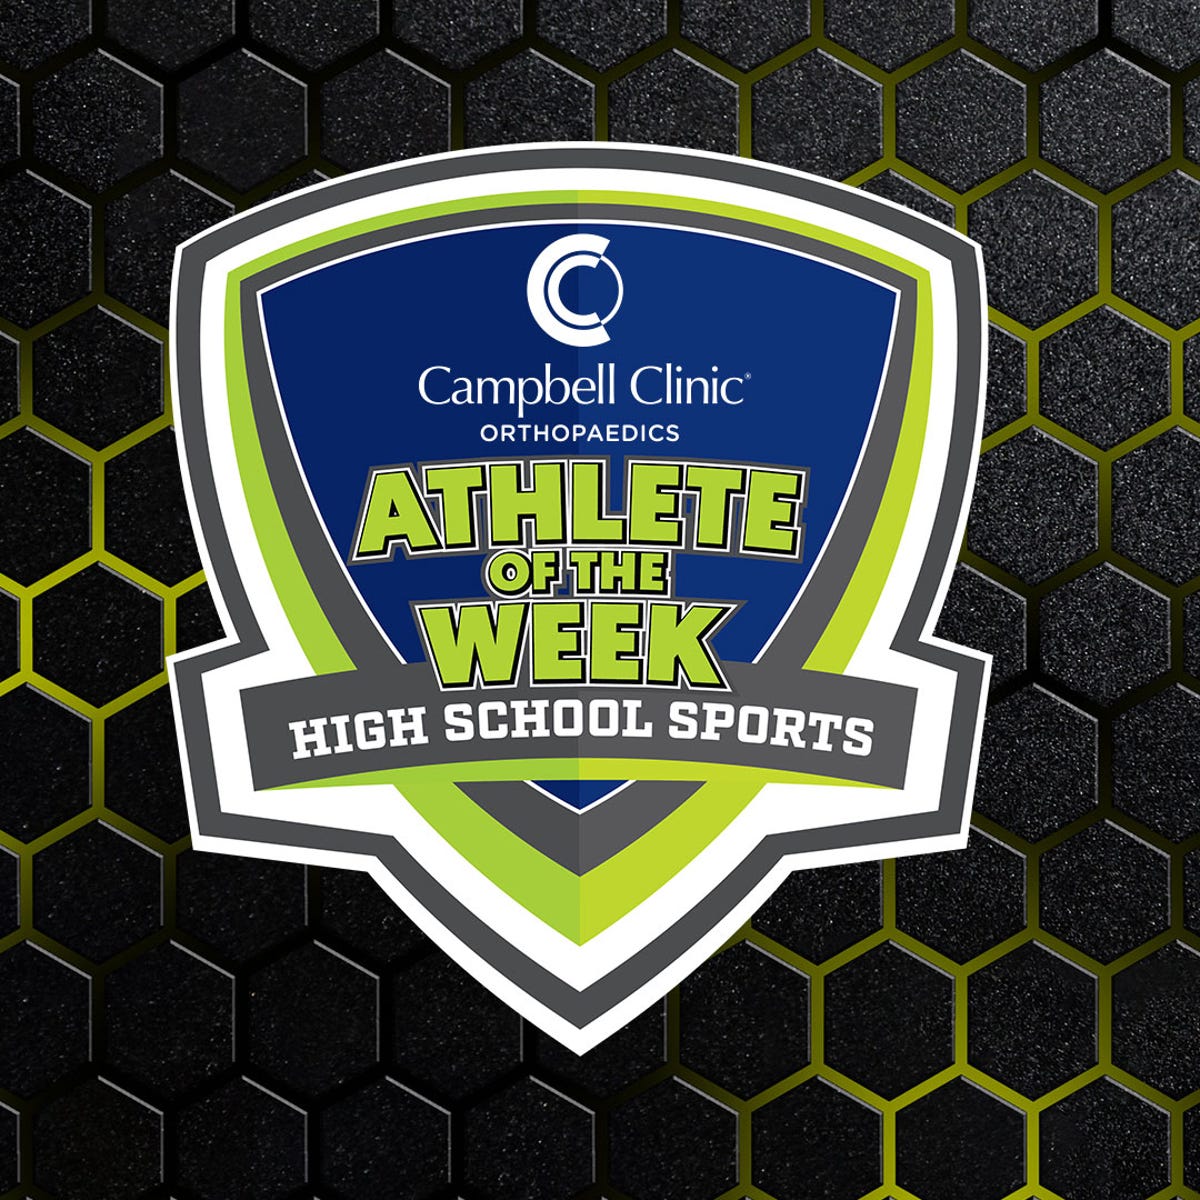 Vote now for the Campbell Clinic boys high school athlete of the week for Feb. 4-10